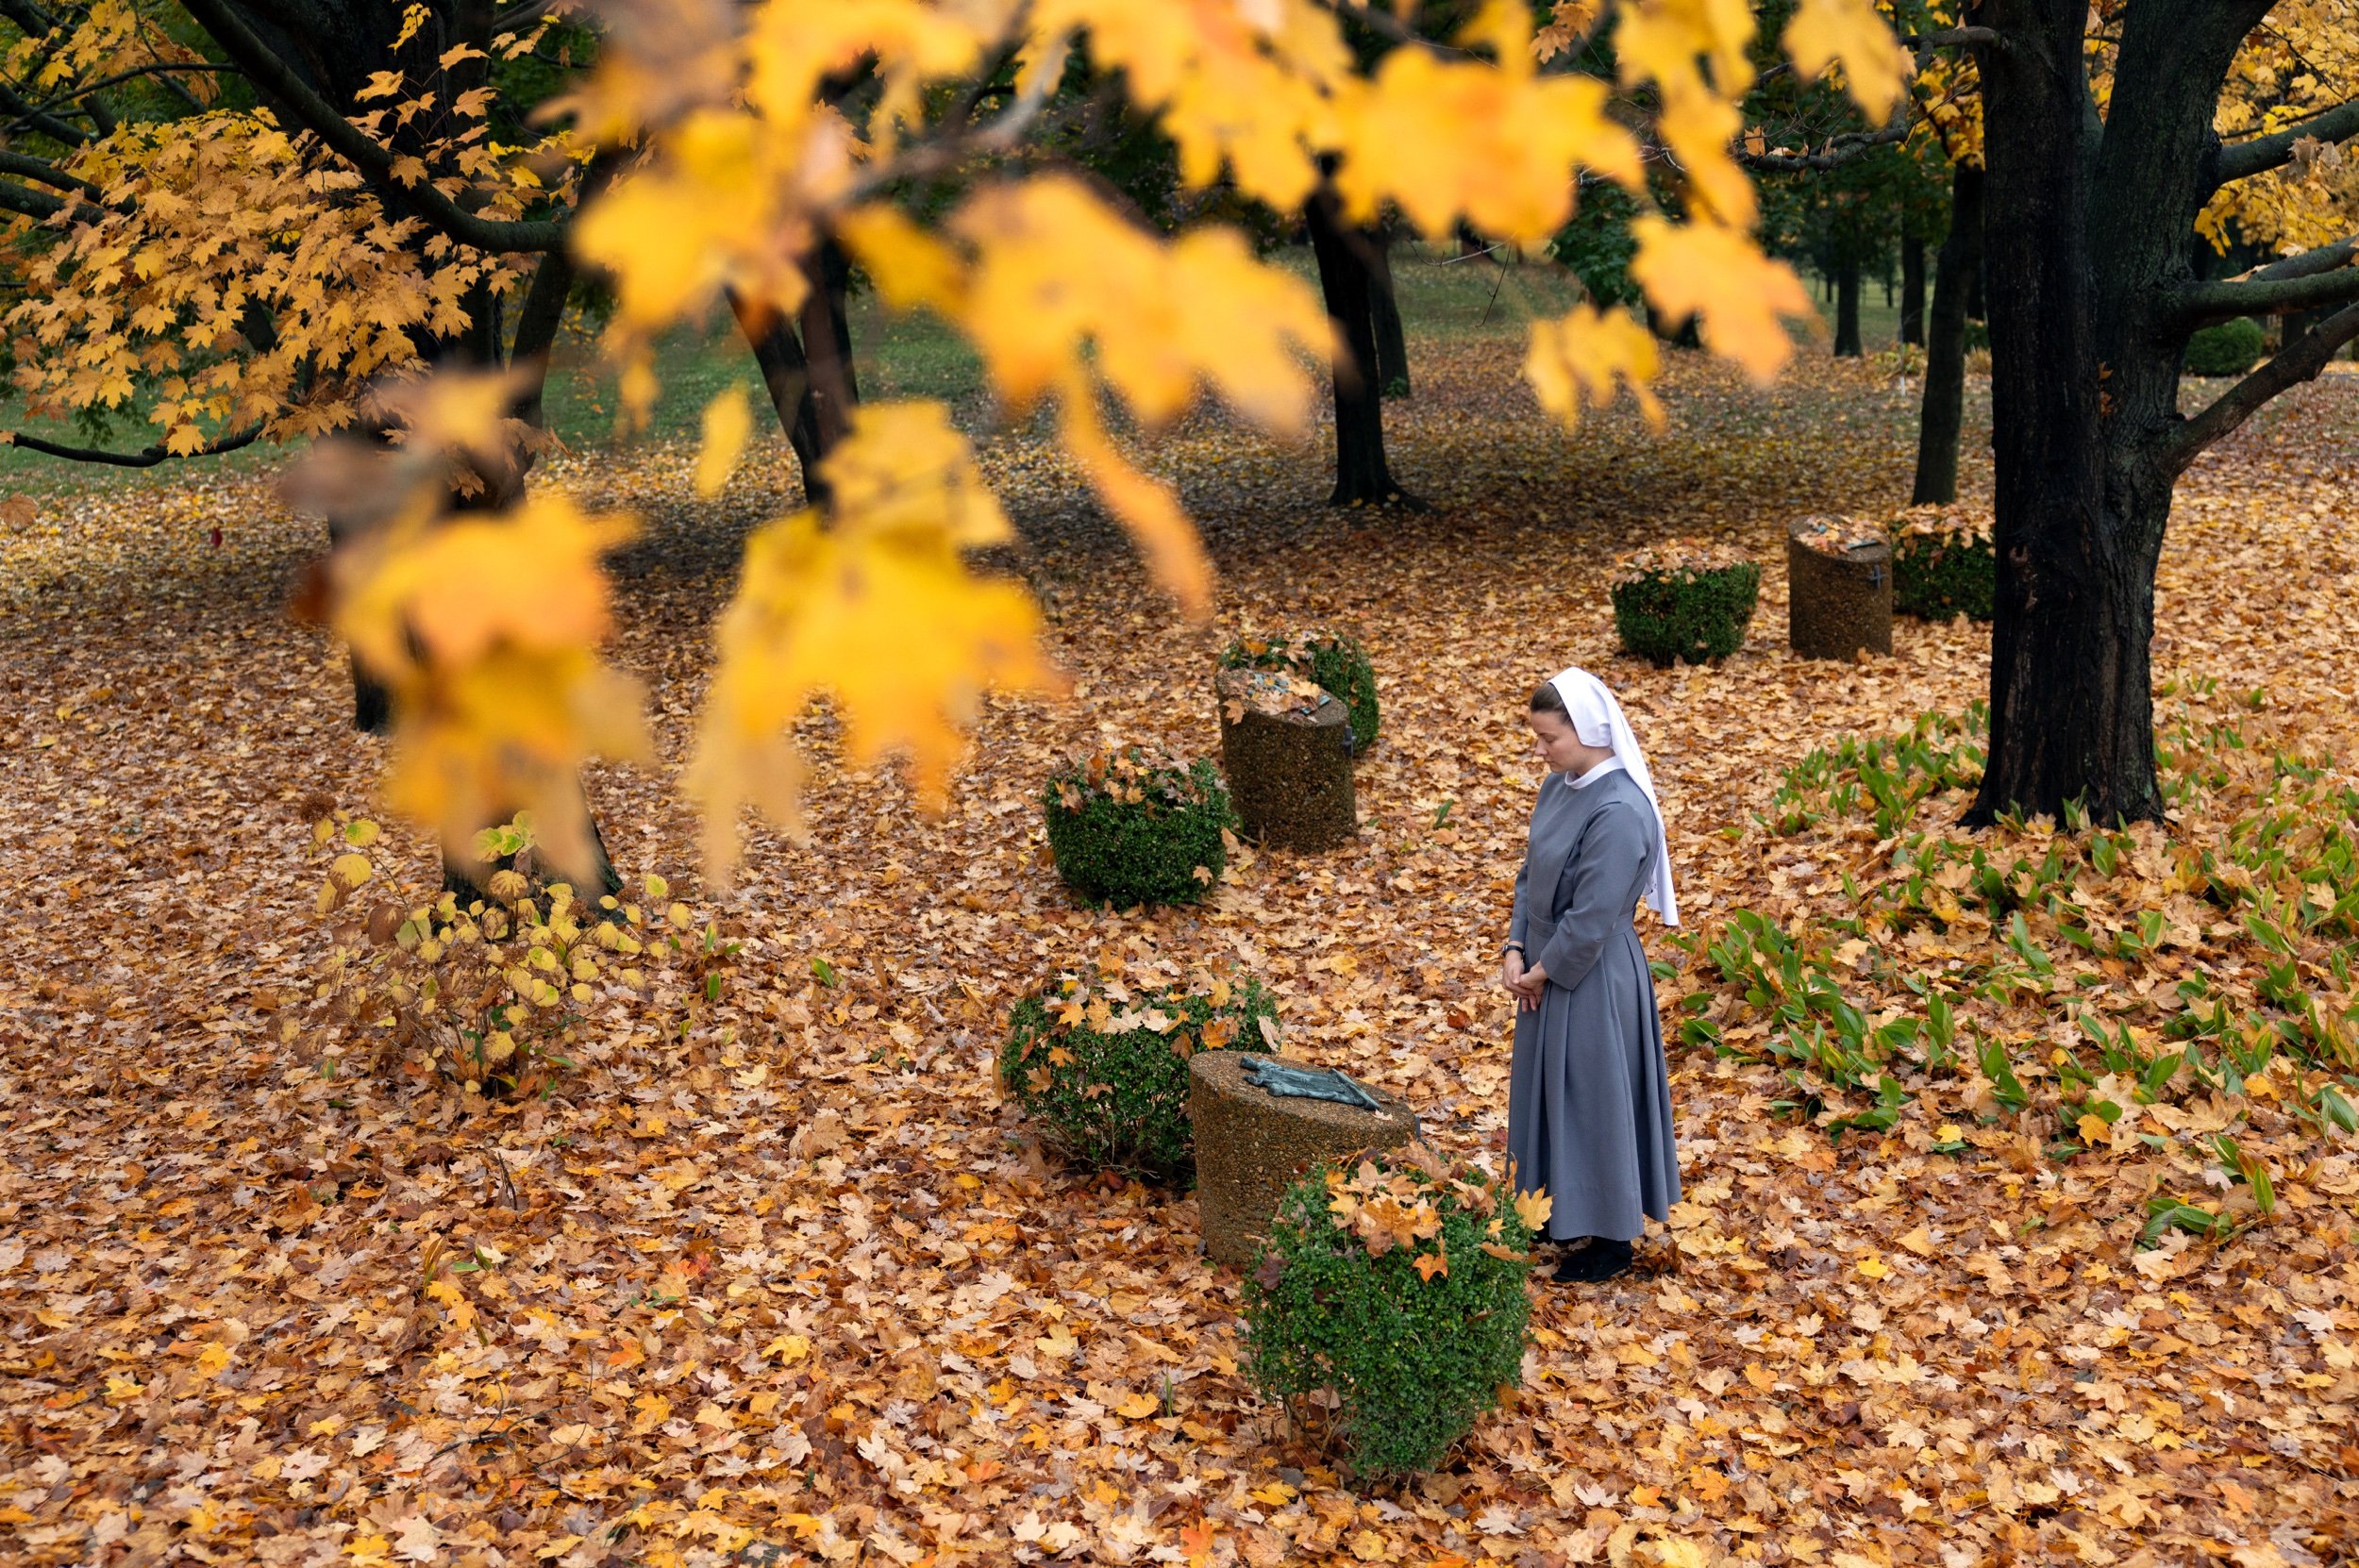   Sister M. Gloria Buckley, of the Sisters of St. Francis of the Martyr St. George, prayed the Stations of the Cross during personal prayer time Oct. 31 at St. Francis Convent in Alton, Illinois.  